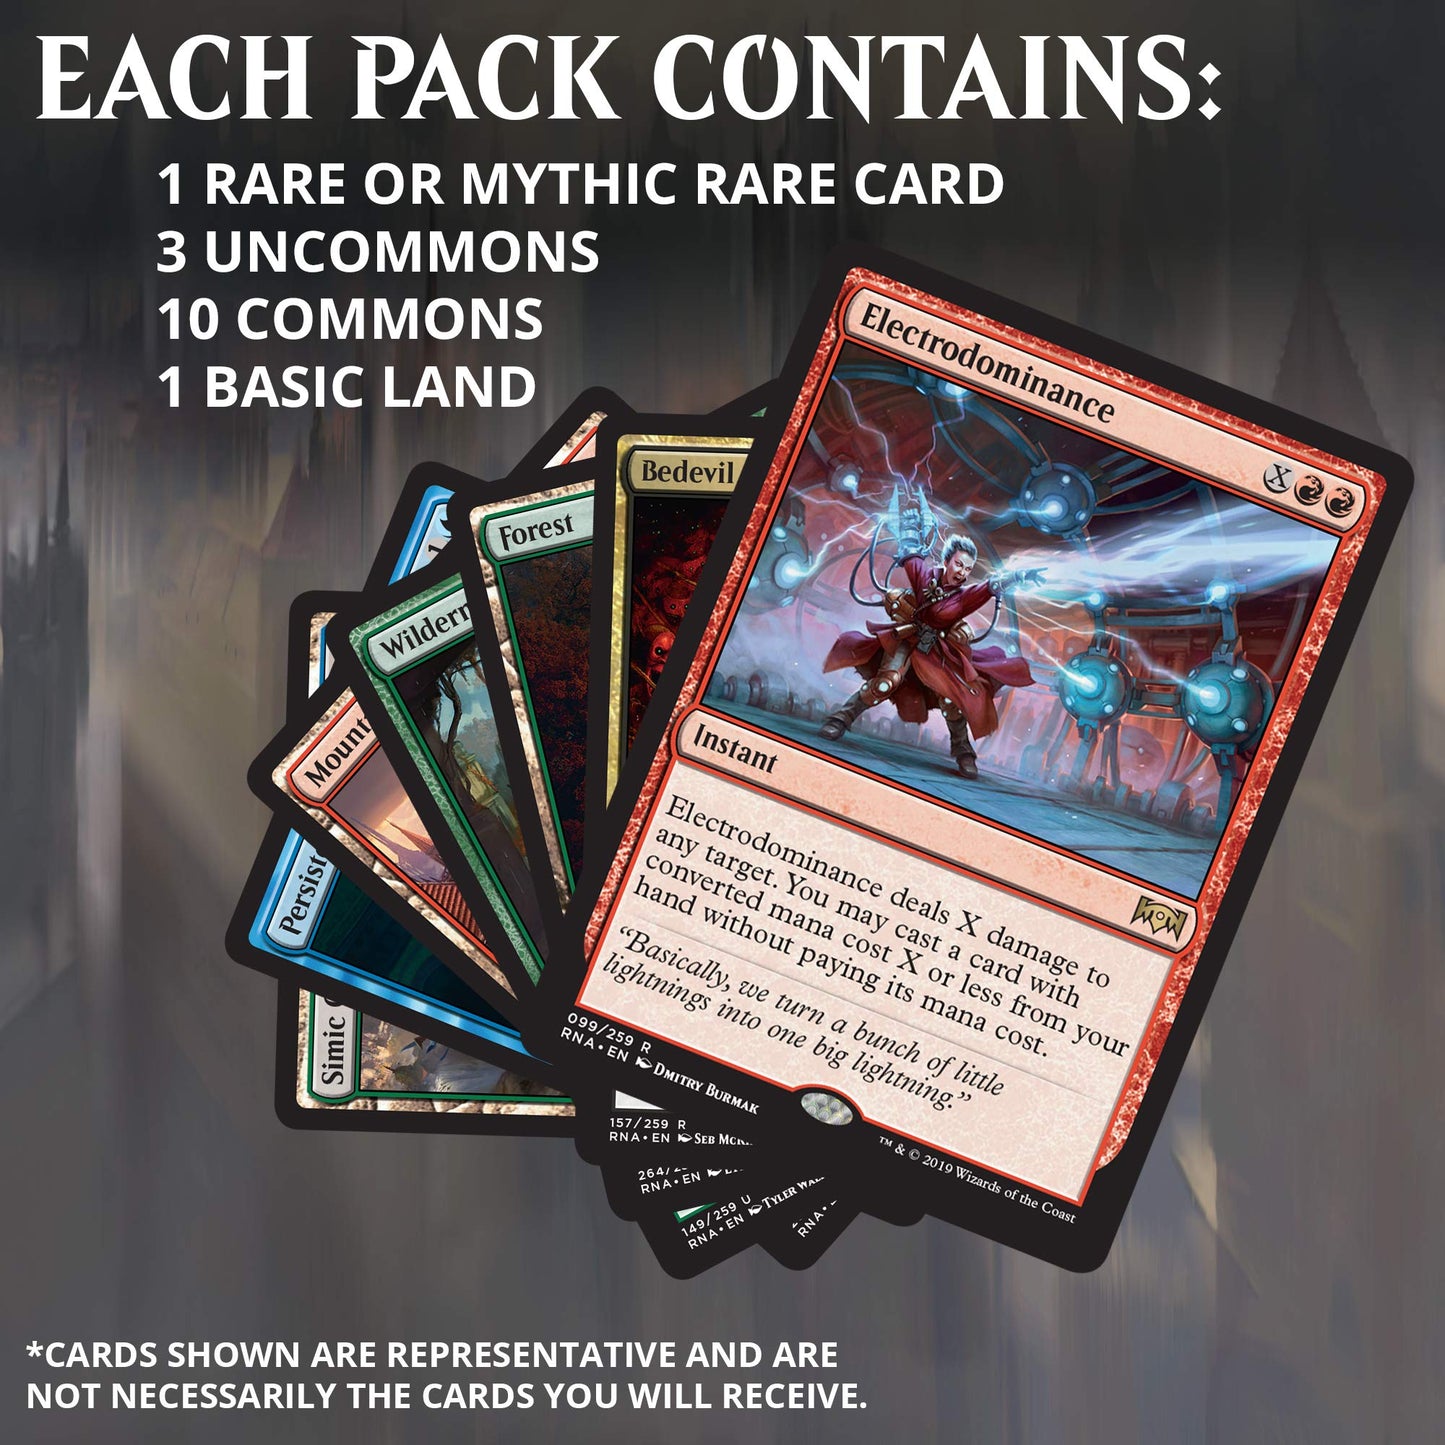 Magic: The Gathering Ravnica Allegiance Booster Box | 36 Booster Packs (540 Cards)